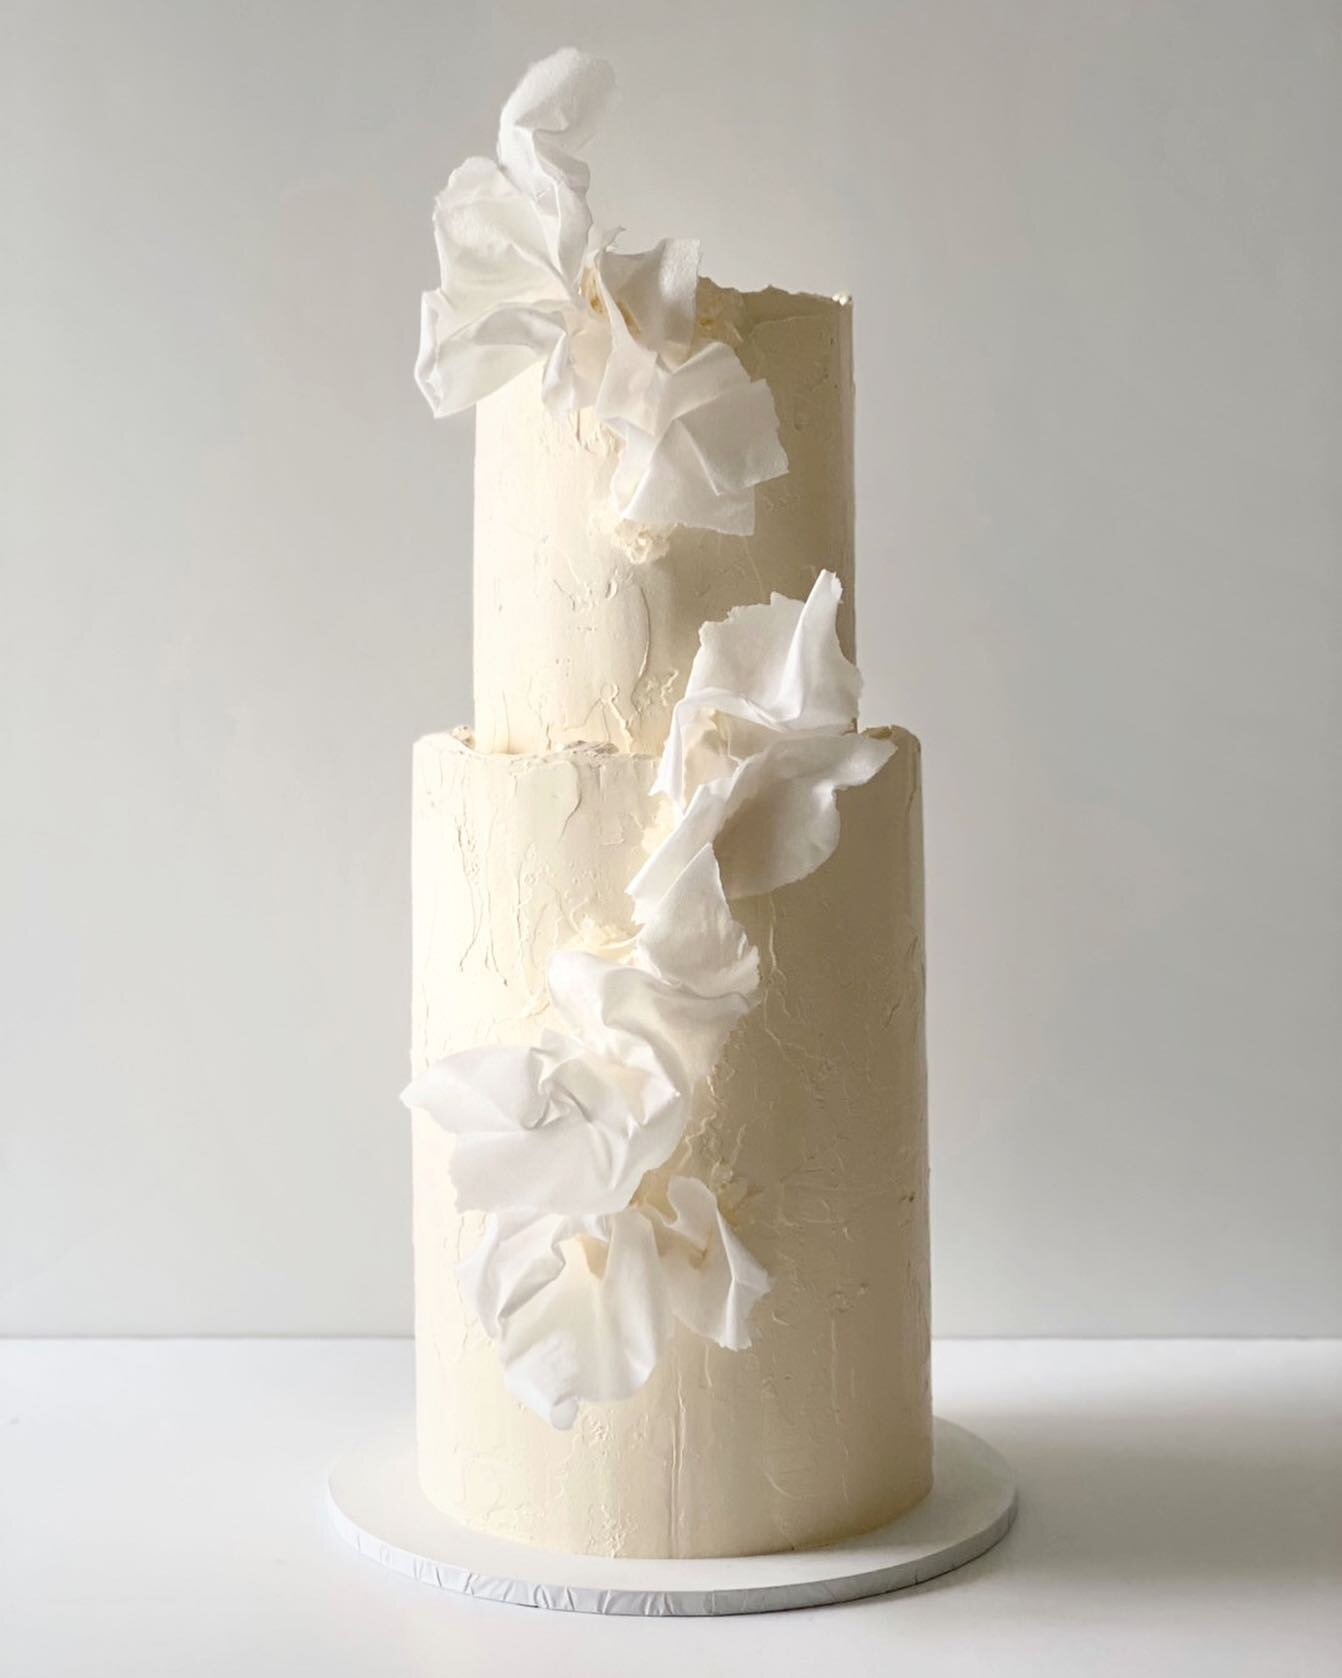 ETHEREAL BEAUTY 🤍✨💫 
A minimalistic approach to a traditional wedding cake. Beautiful restraint in colour but not in texture, it&rsquo;s contemporary lines and aesthetic. Happy Wedding Day to our @violetandsalt lovers! 💫✨🤍
_
#violetandsalt #viole